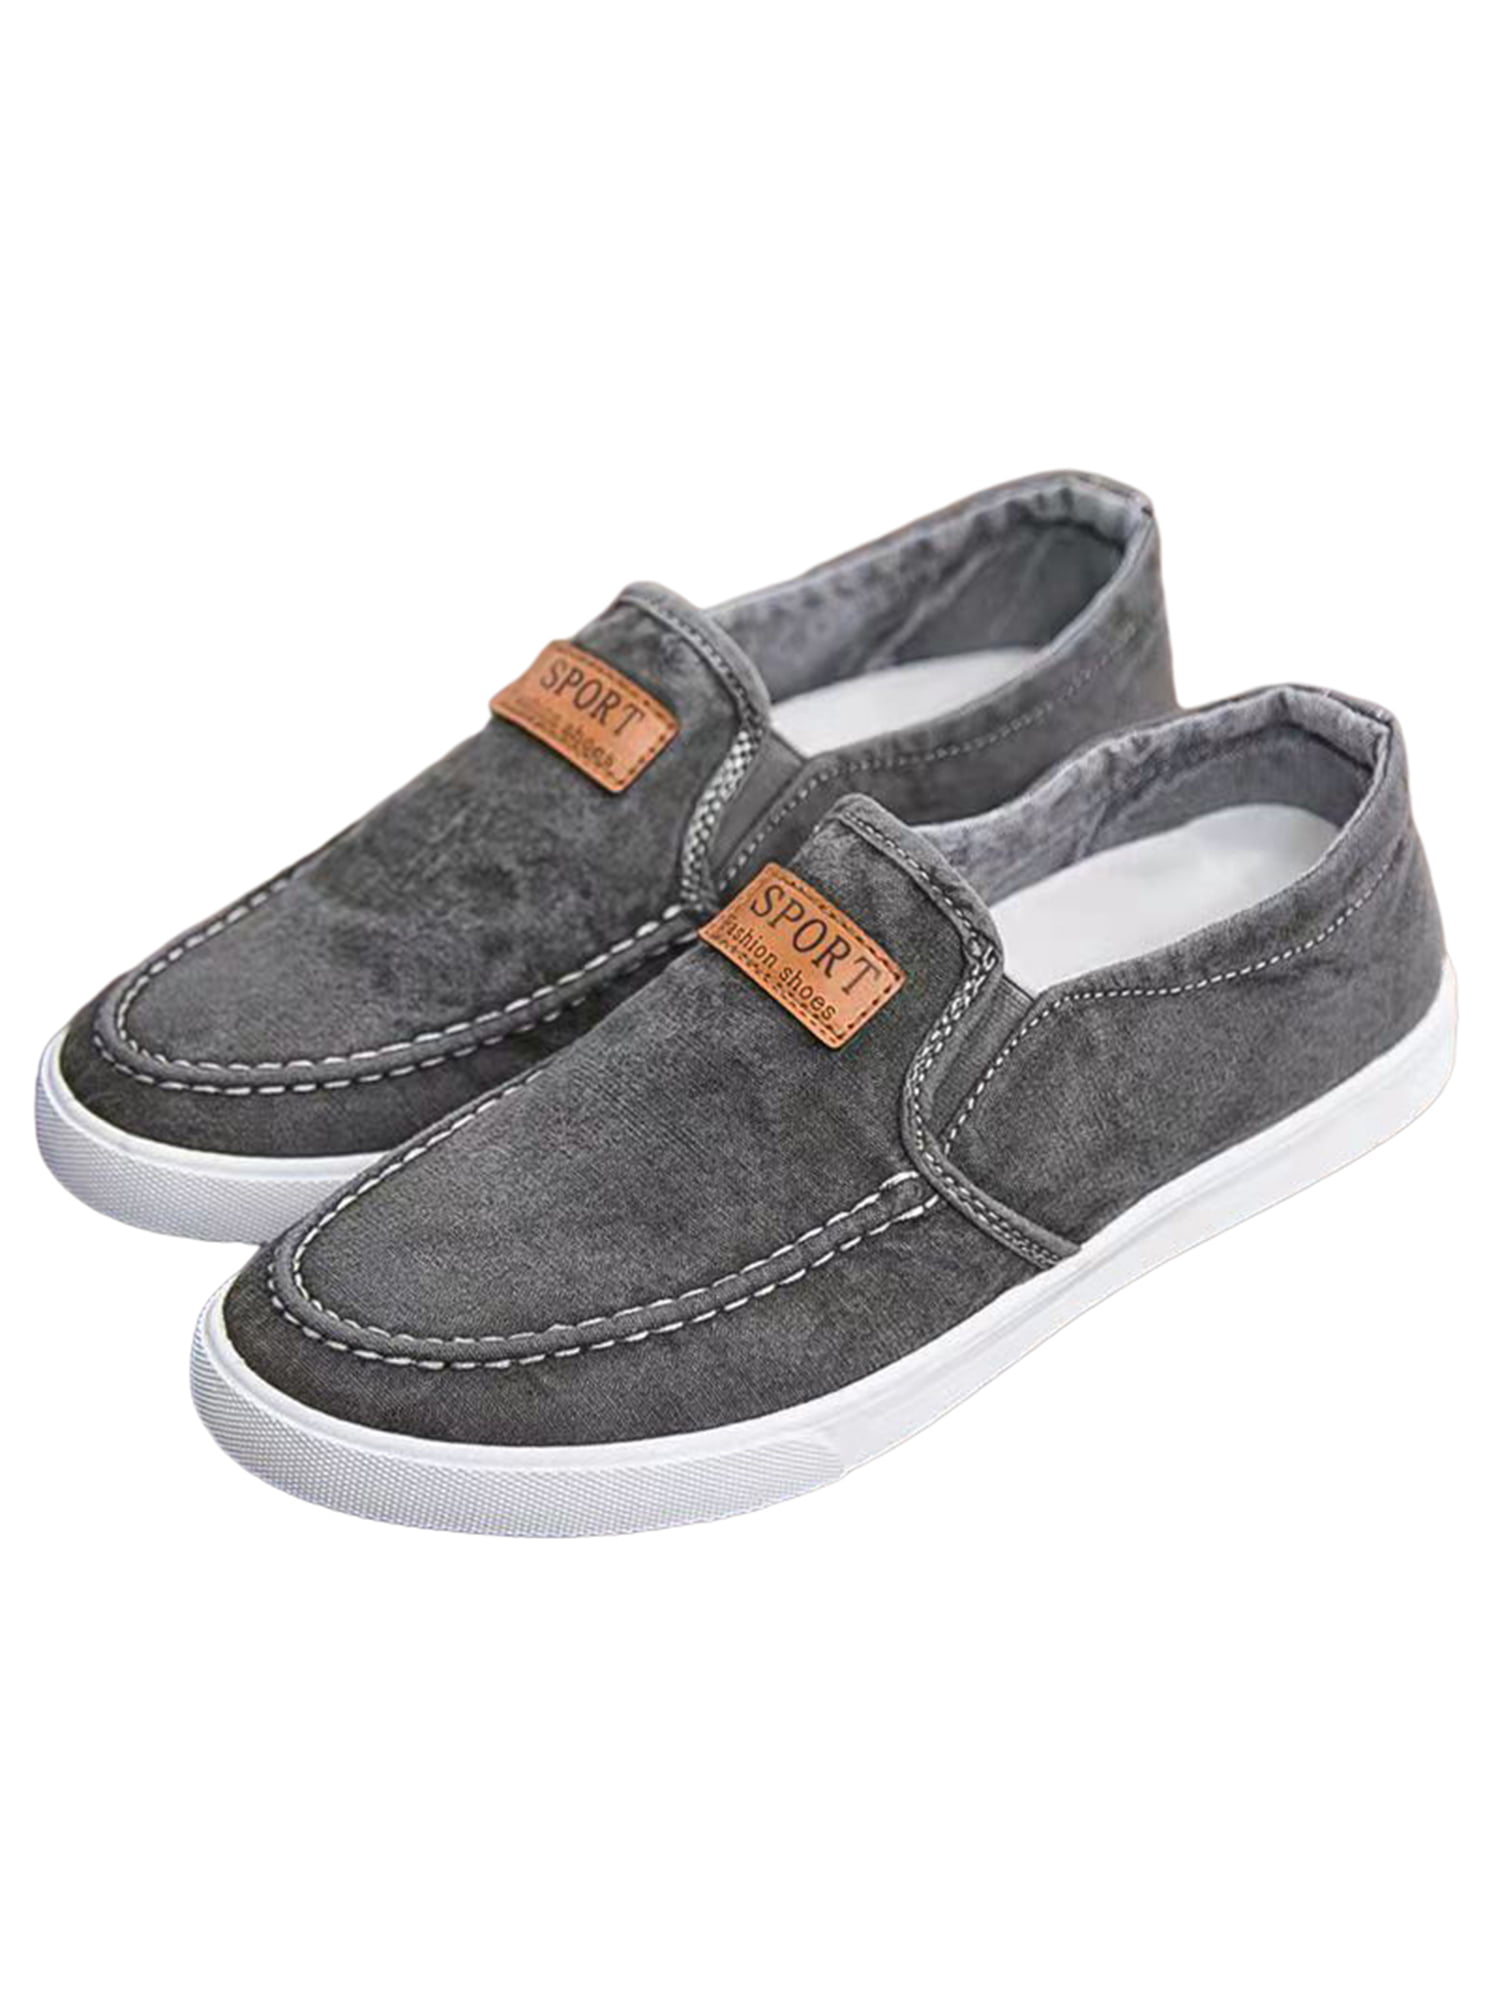 Mens Driving Moccasins Breathable Flats New Canvas Pumps Slip on Loafers Shoes B